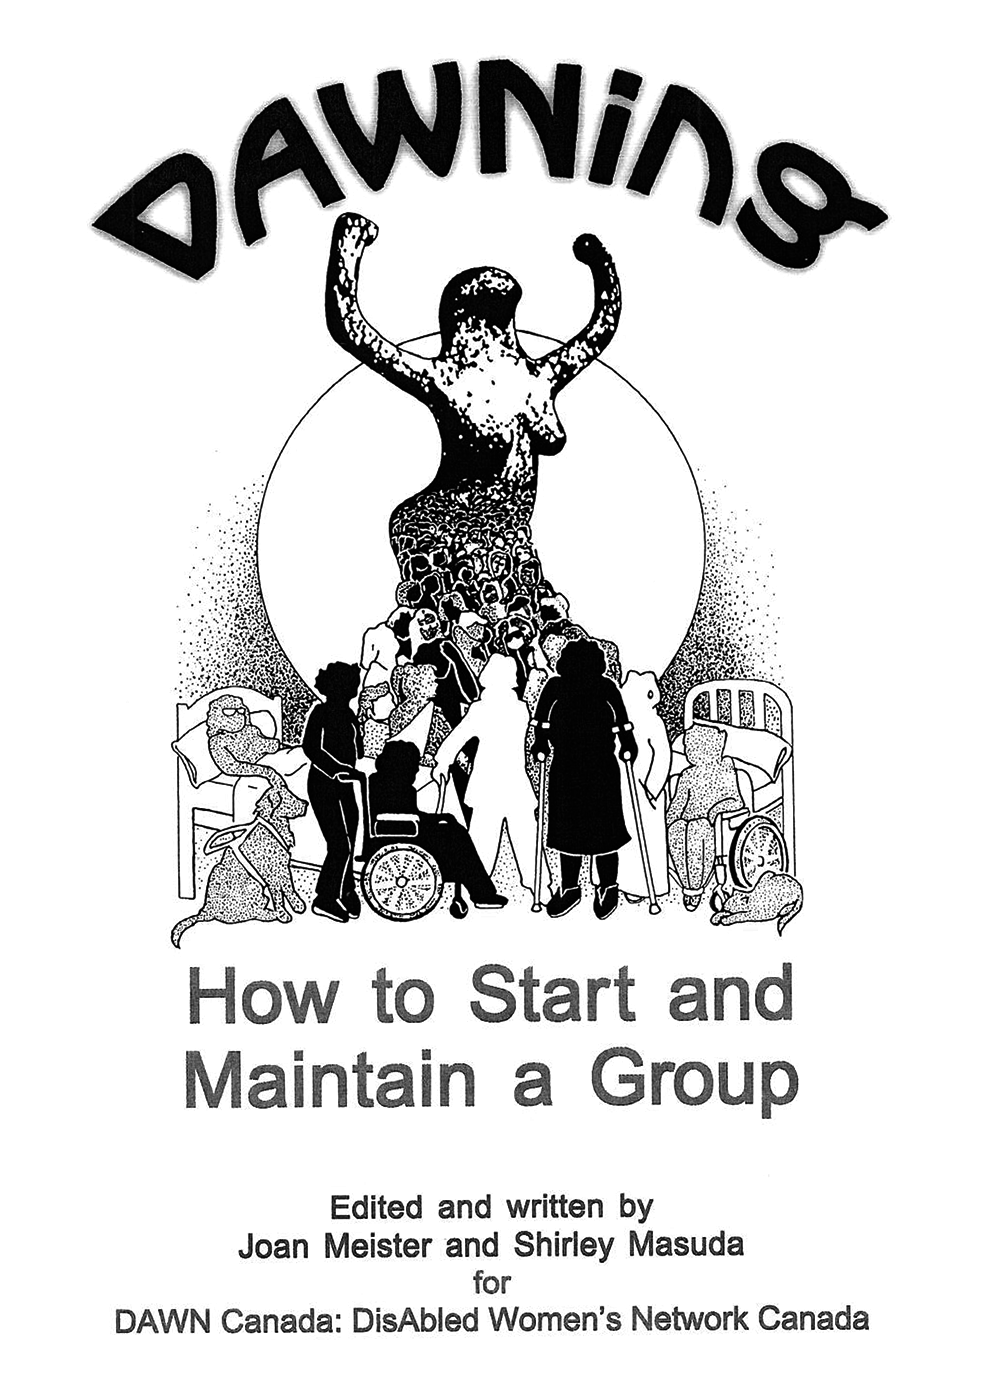 scan de la couverture du manuel contenant le texte: "DAWNing, How to Start and Maintain a Group, Edited and written by Joan Meister and Shirley Masuda for DAWN Canada: DisAbled Women's Network Canada